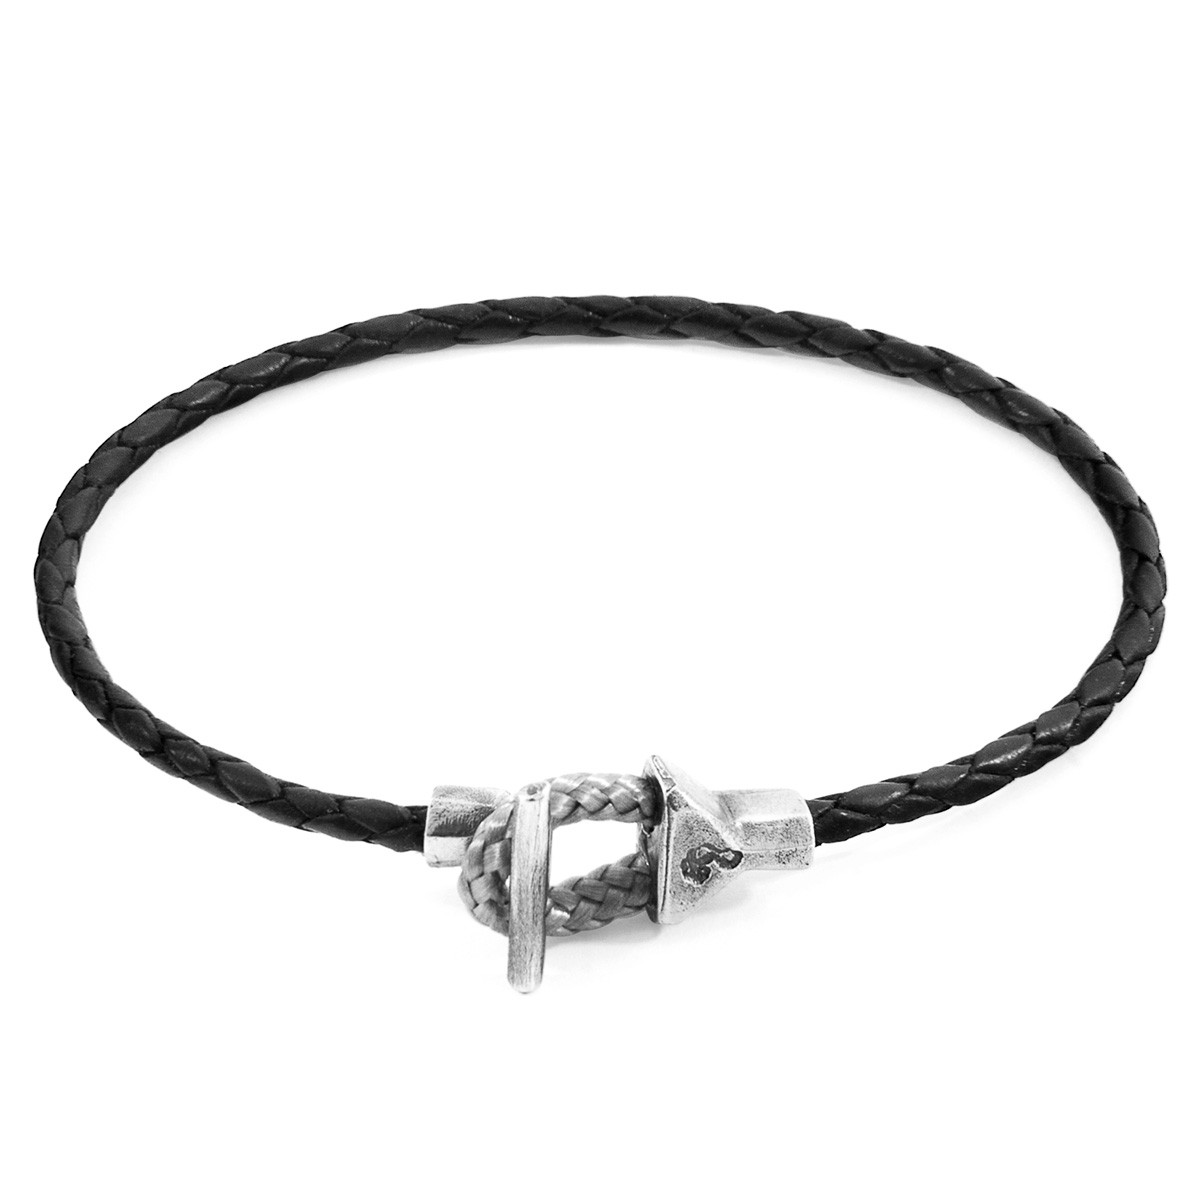 Anchor & Crew Coal Black Cullen Silver and Braided Leather Bracelet